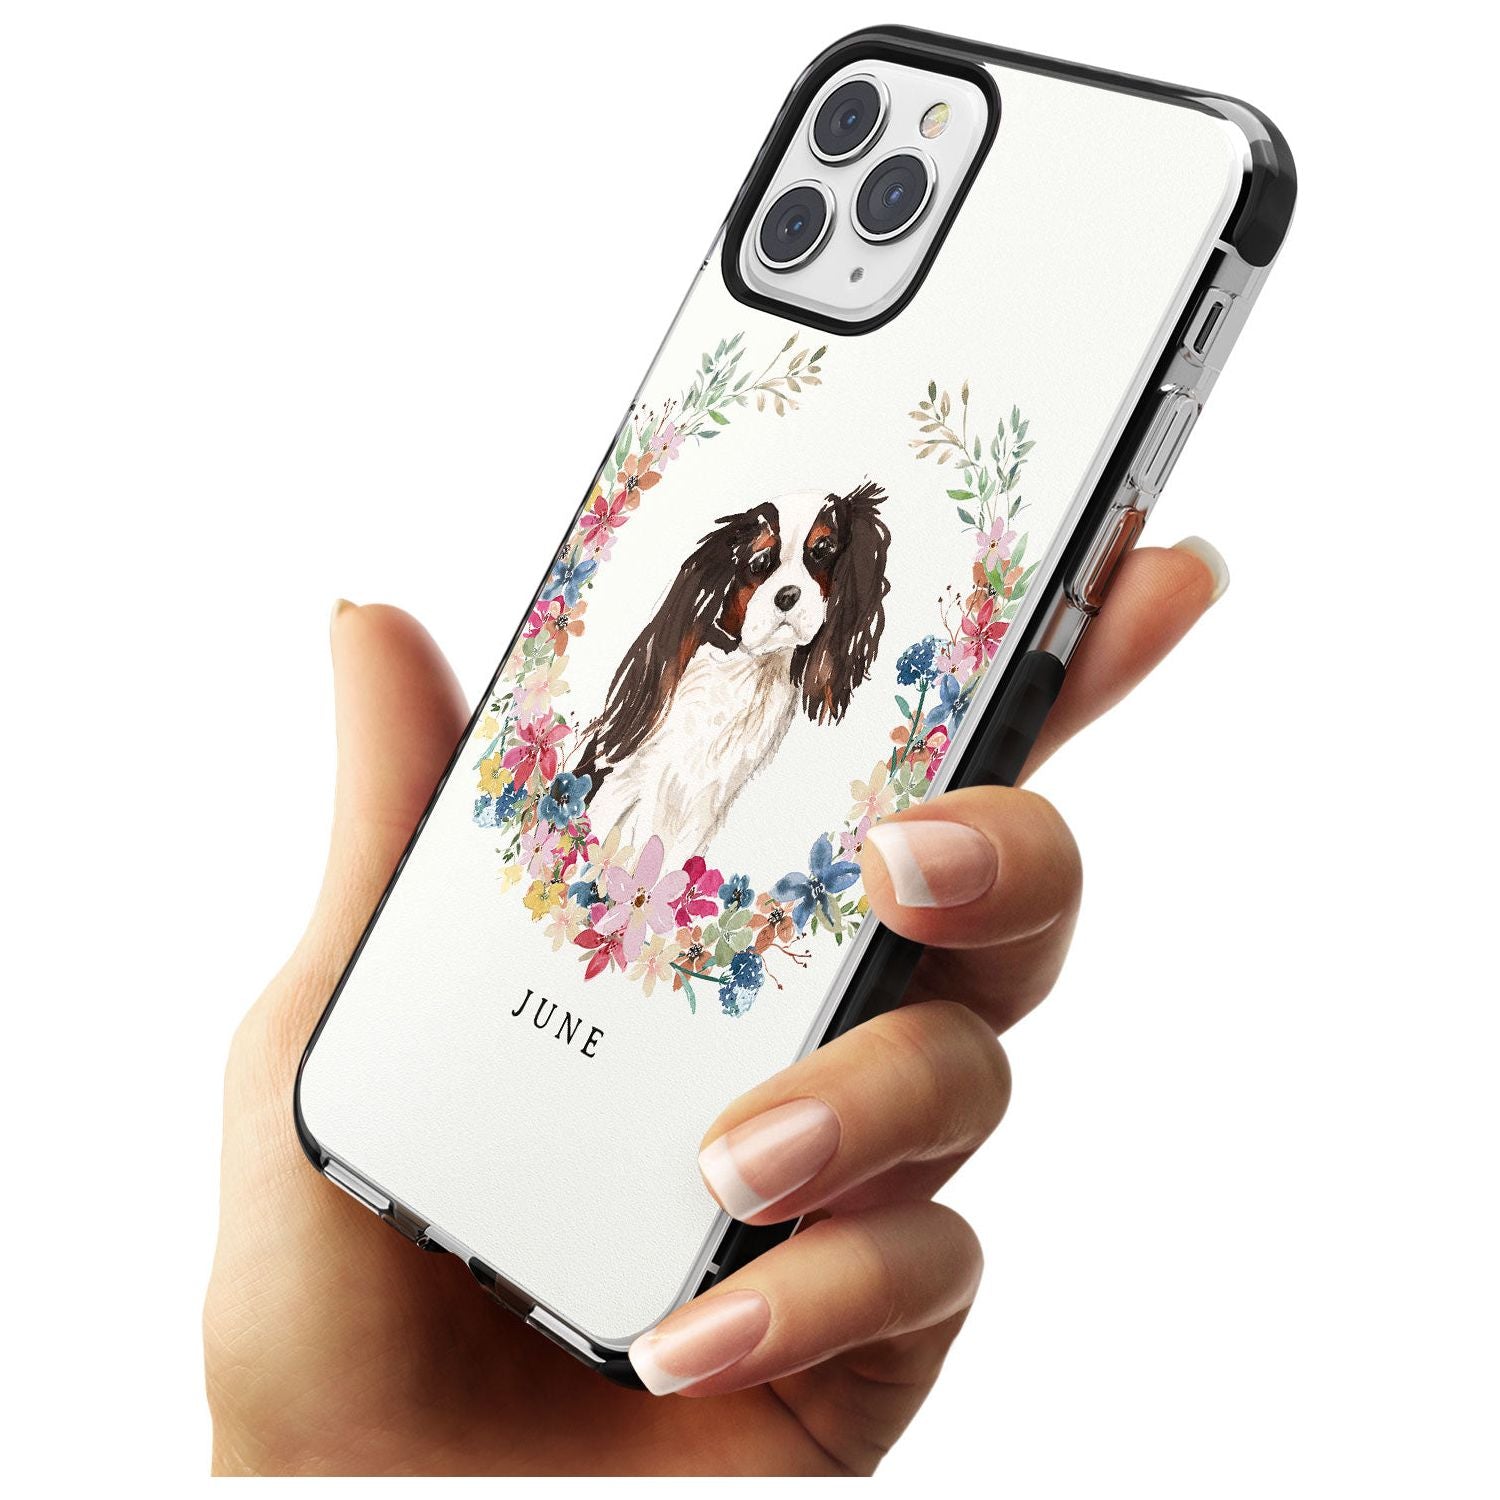 Tri Coloured King Charles Watercolour Dog Portrait Black Impact Phone Case for iPhone 11 Pro Max